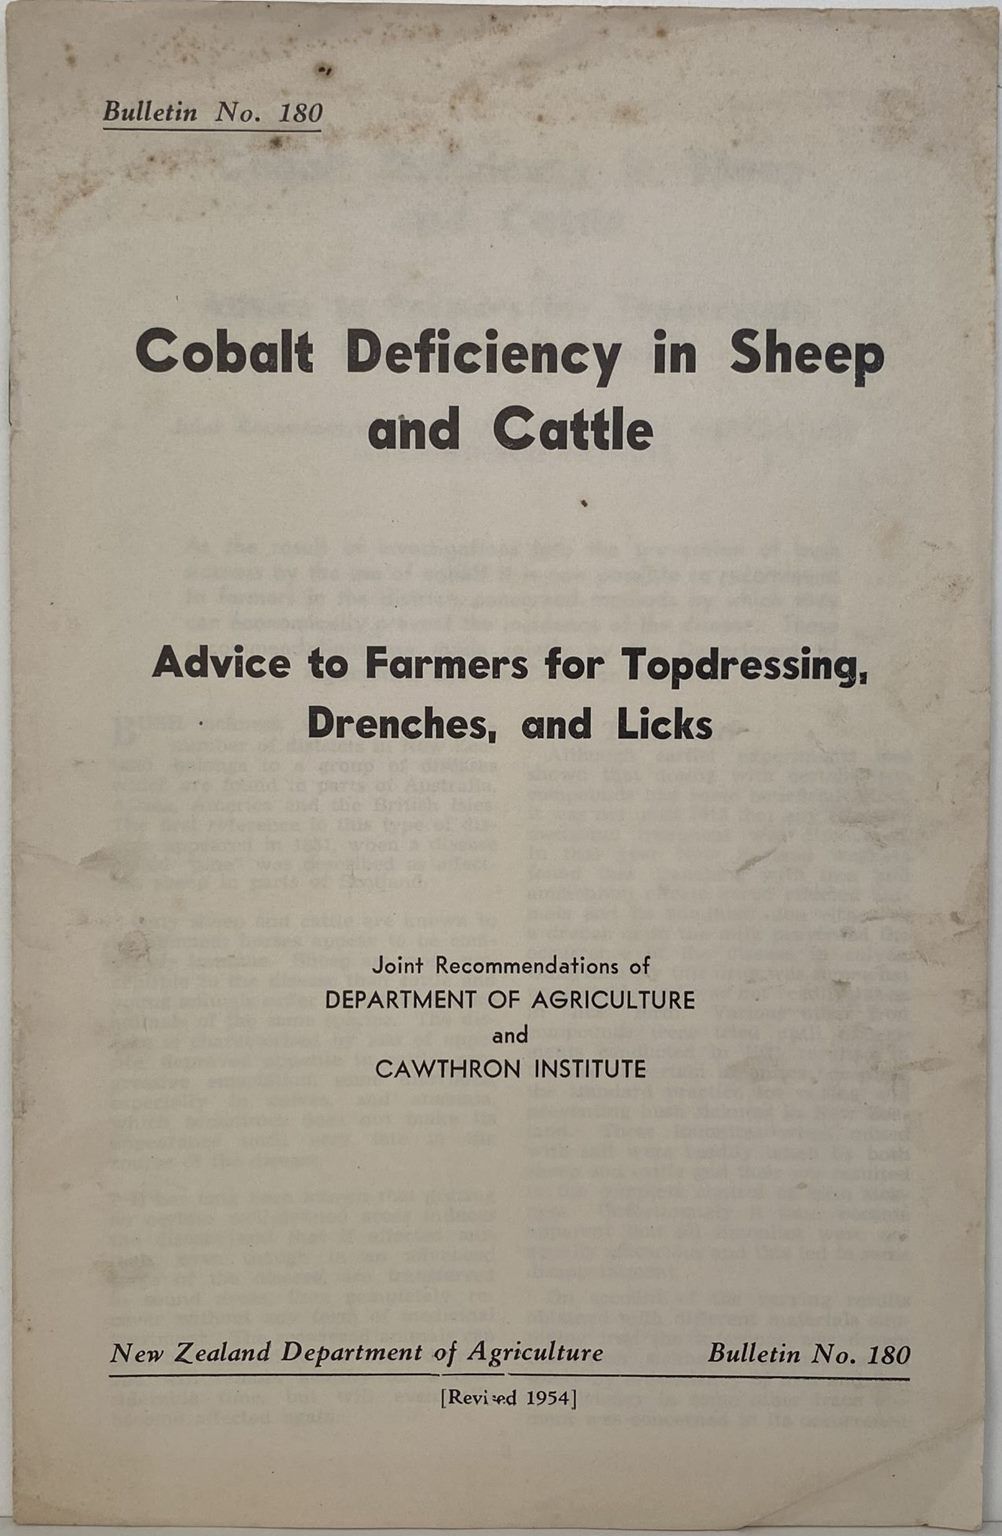 COBALT DEFICIENCY IN SHEEP: Advice to Farmers: Bulletin No. 180